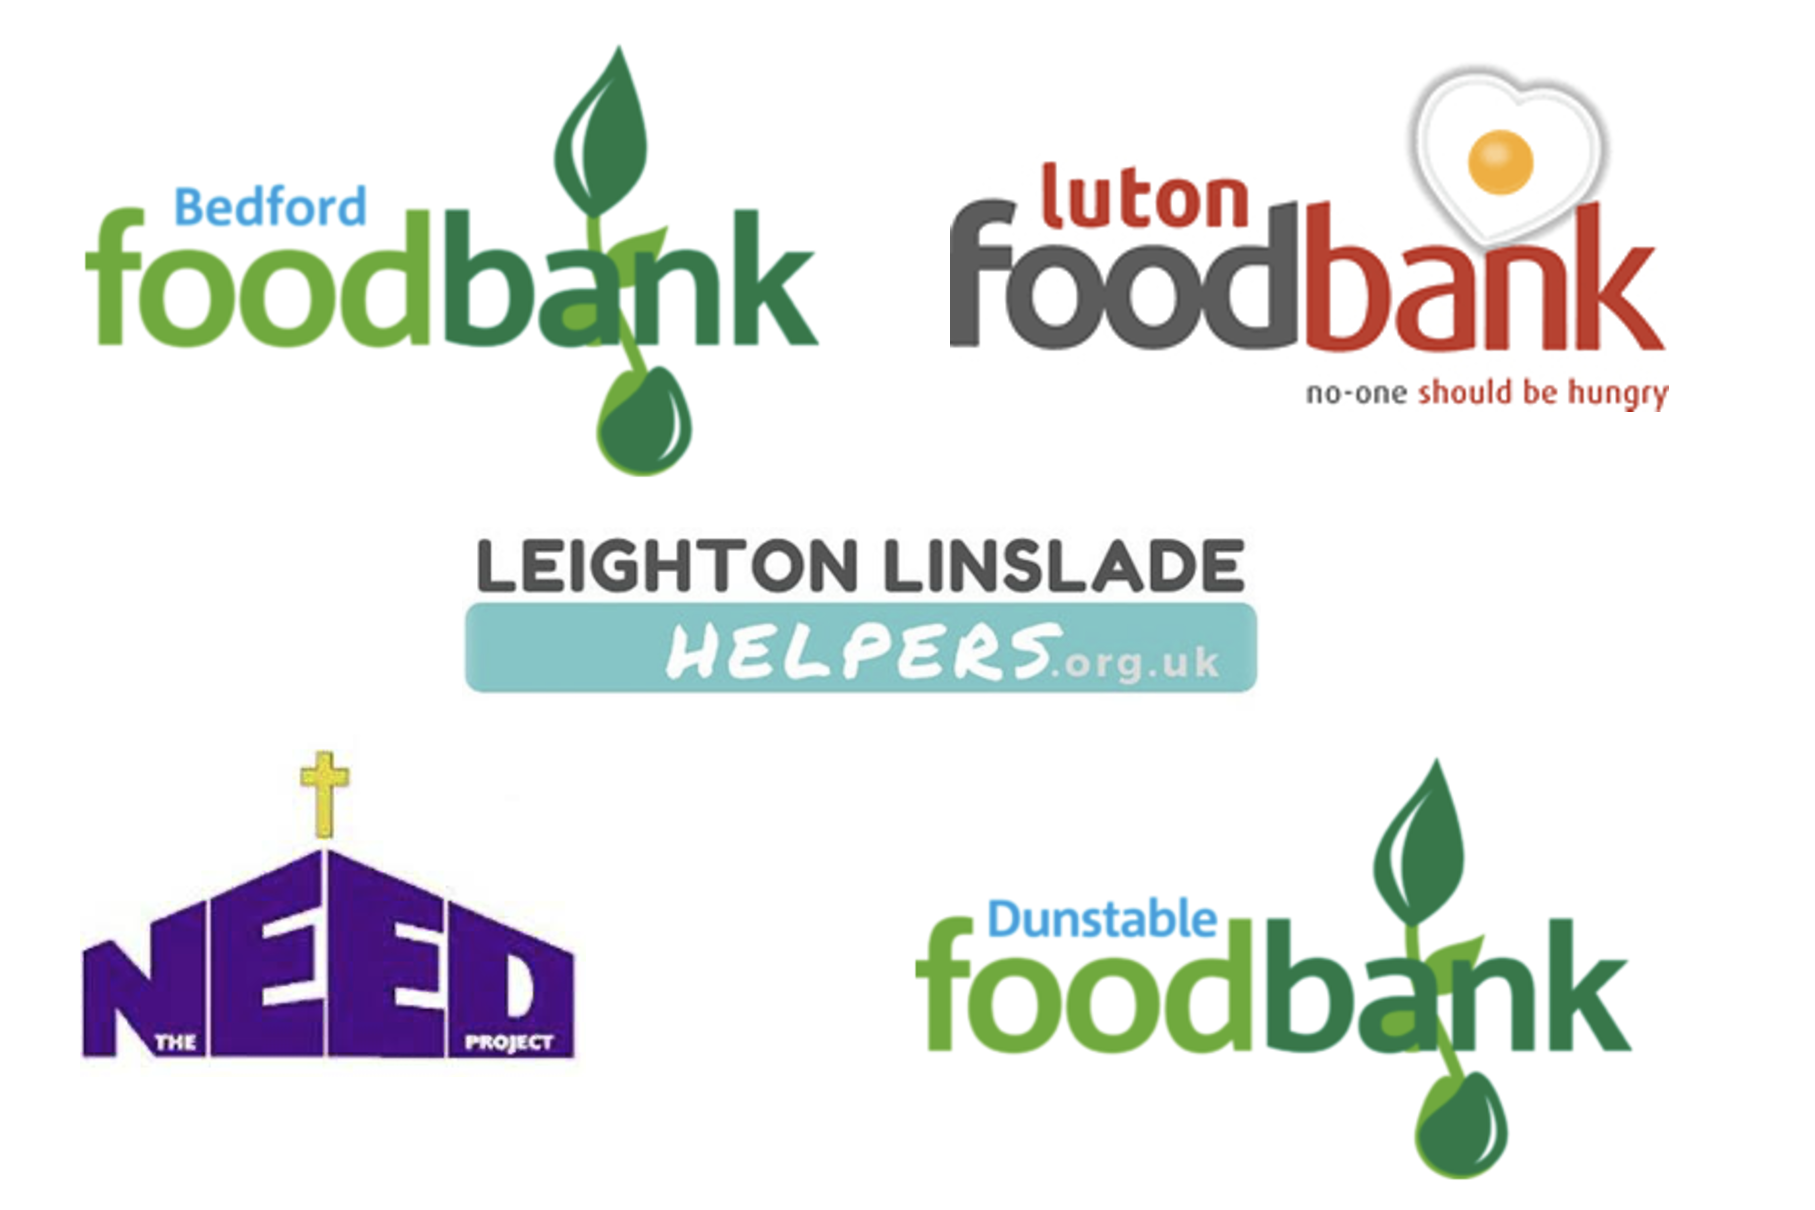 £5,000 for Local Foodbanks